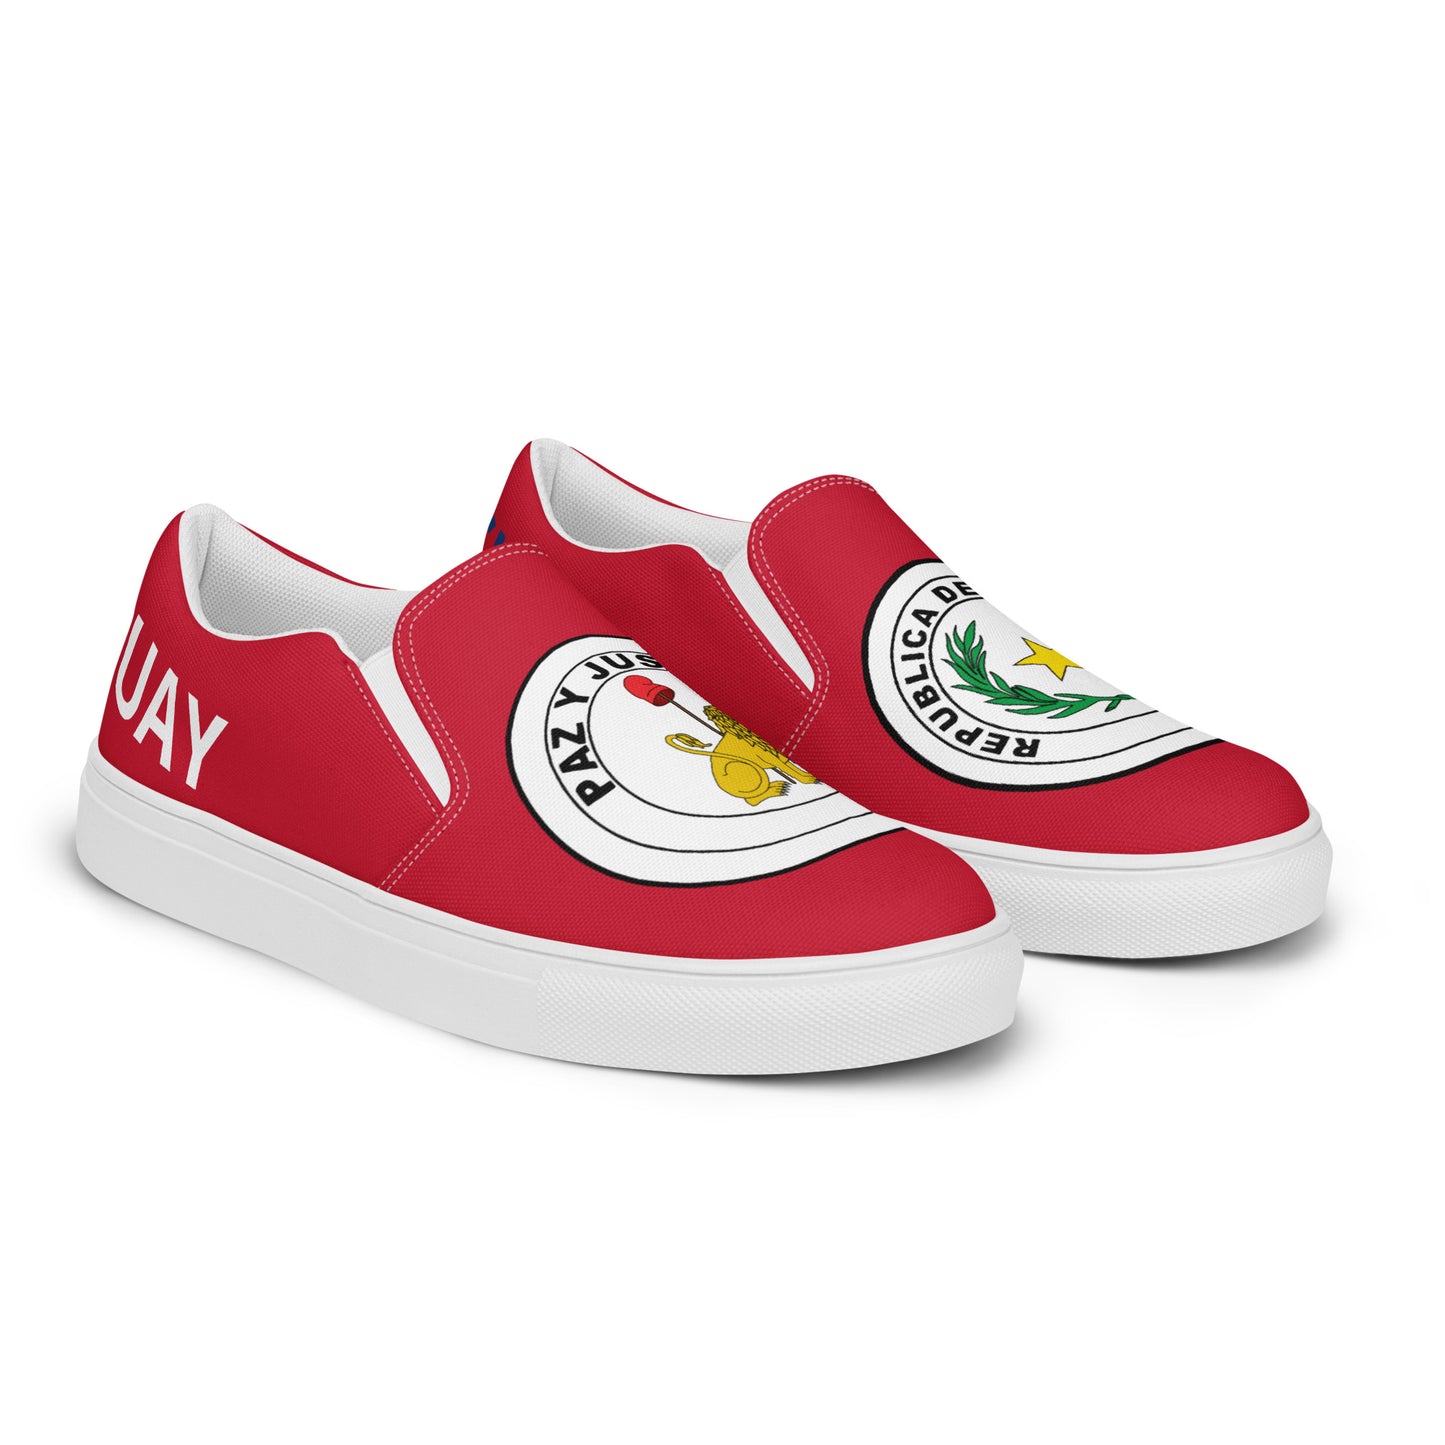 Paraguay - Women - Red - Slip-on shoes